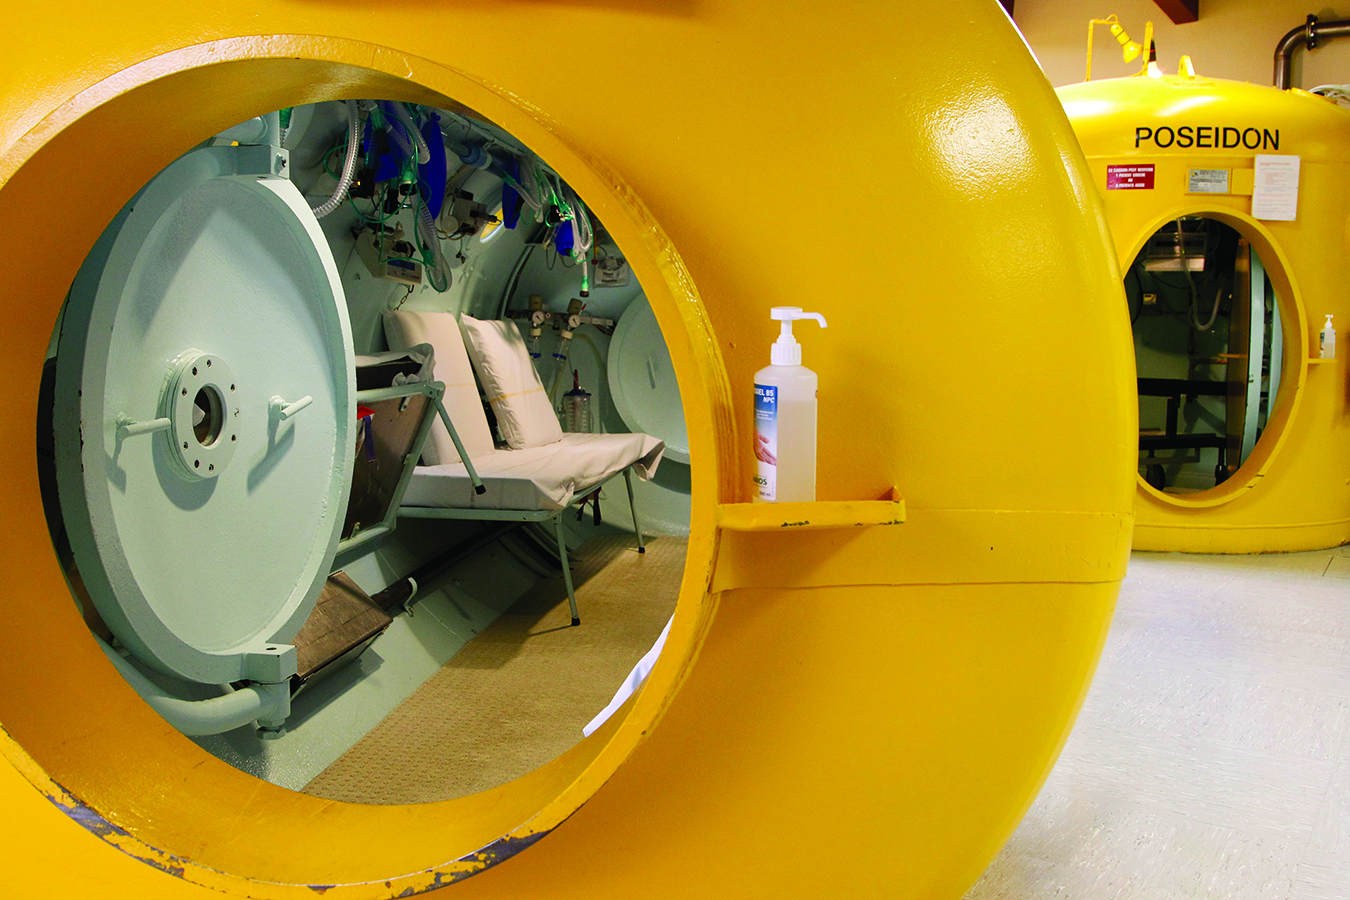 Stock footage of a hyperbaric chamber. Photo courtesy of BSIP/Getty Images.